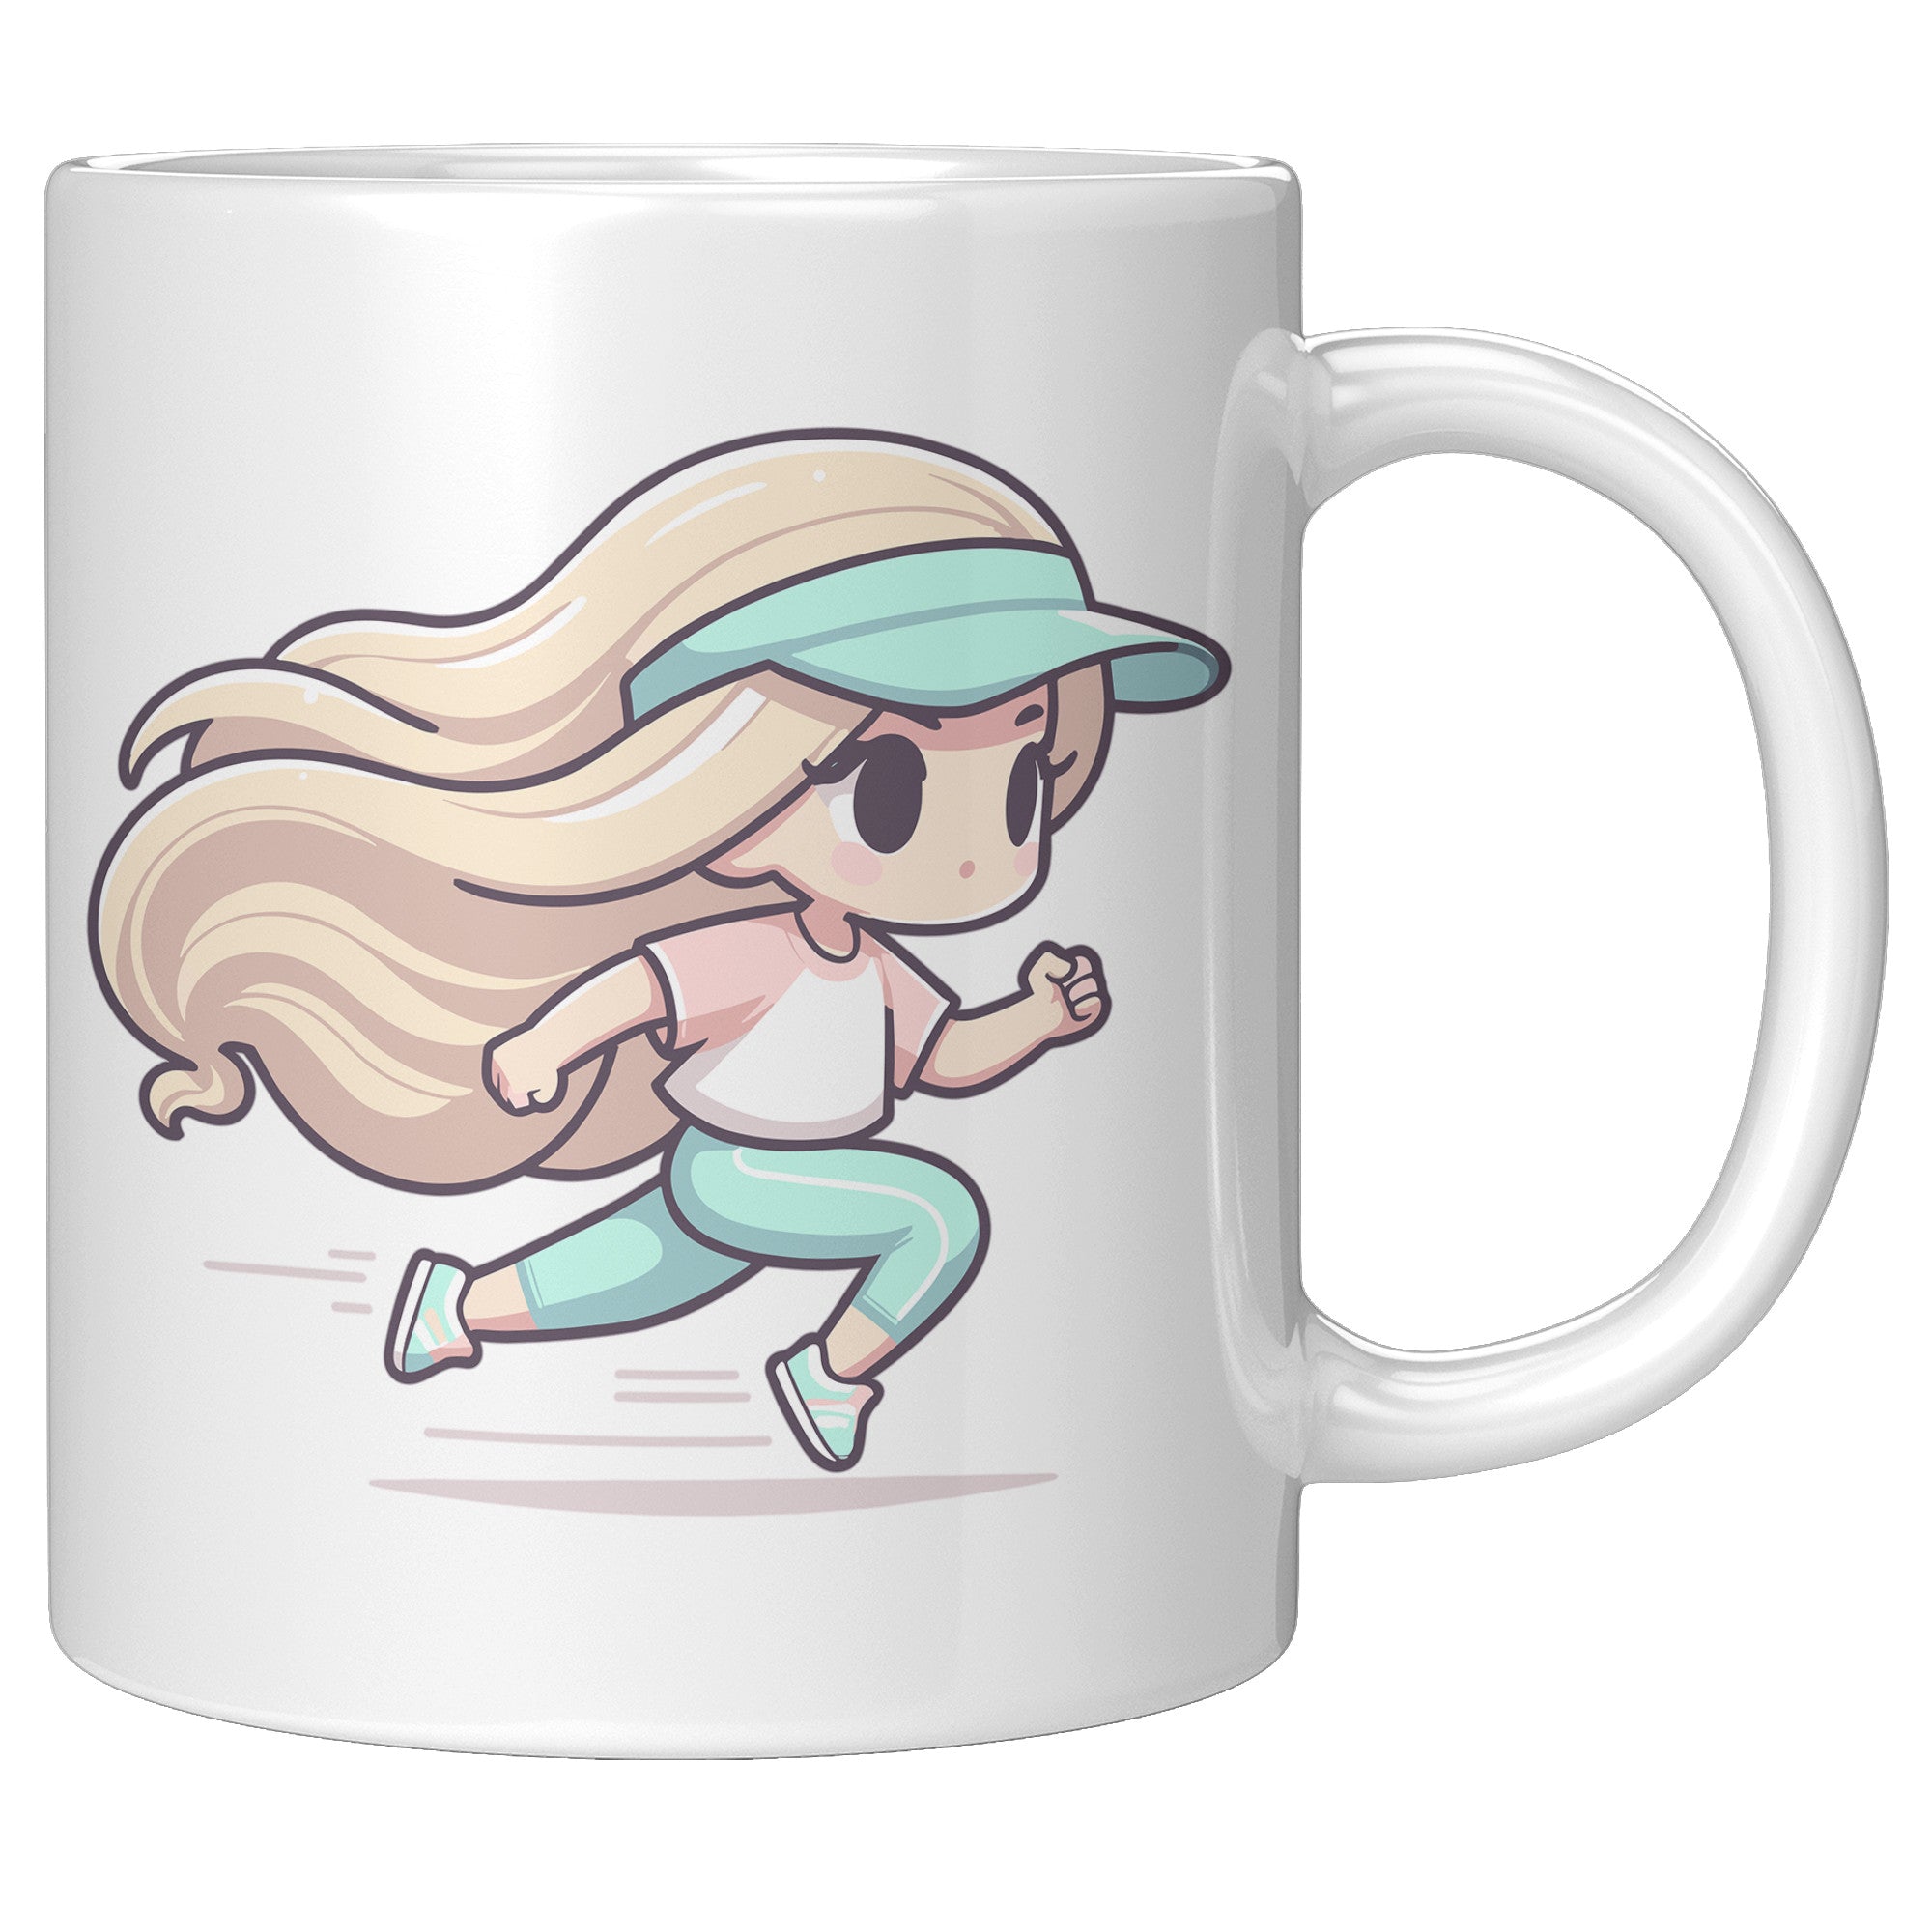 "Female Runner Coffee Mug - Inspirational Running Quotes Cup - Perfect Gift for Women Runners - Motivational Marathoner's Morning Brew" - R